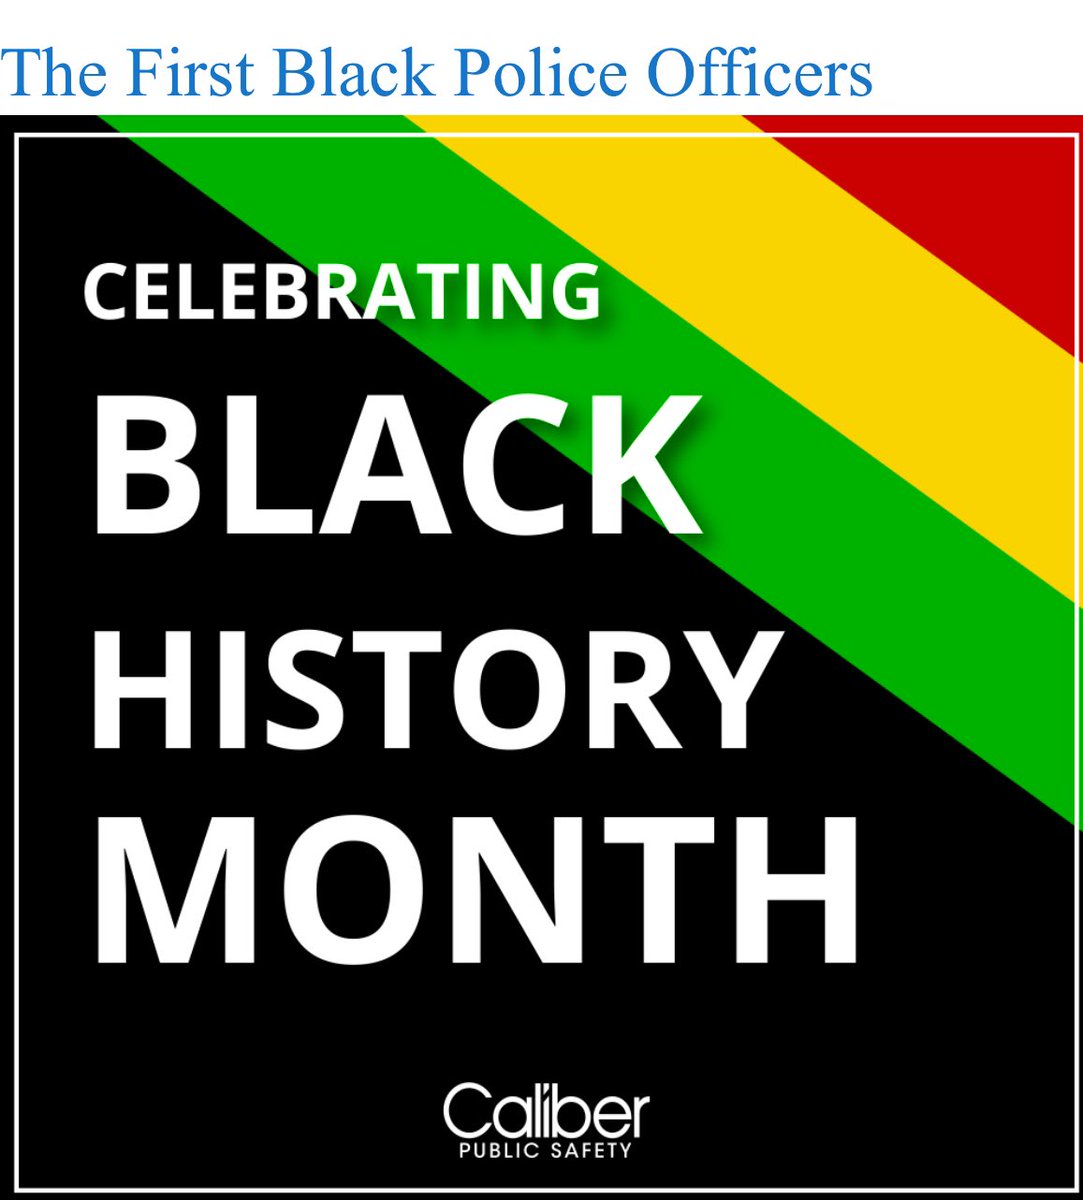 Feb is Blk History Month. A significant percentage of the officers who protect and serve communities throughout North America are black, both men & women, a rich history of service. I am honored to be apart of this percentage. Thank you to all who came before me. #IAmBlackHistory